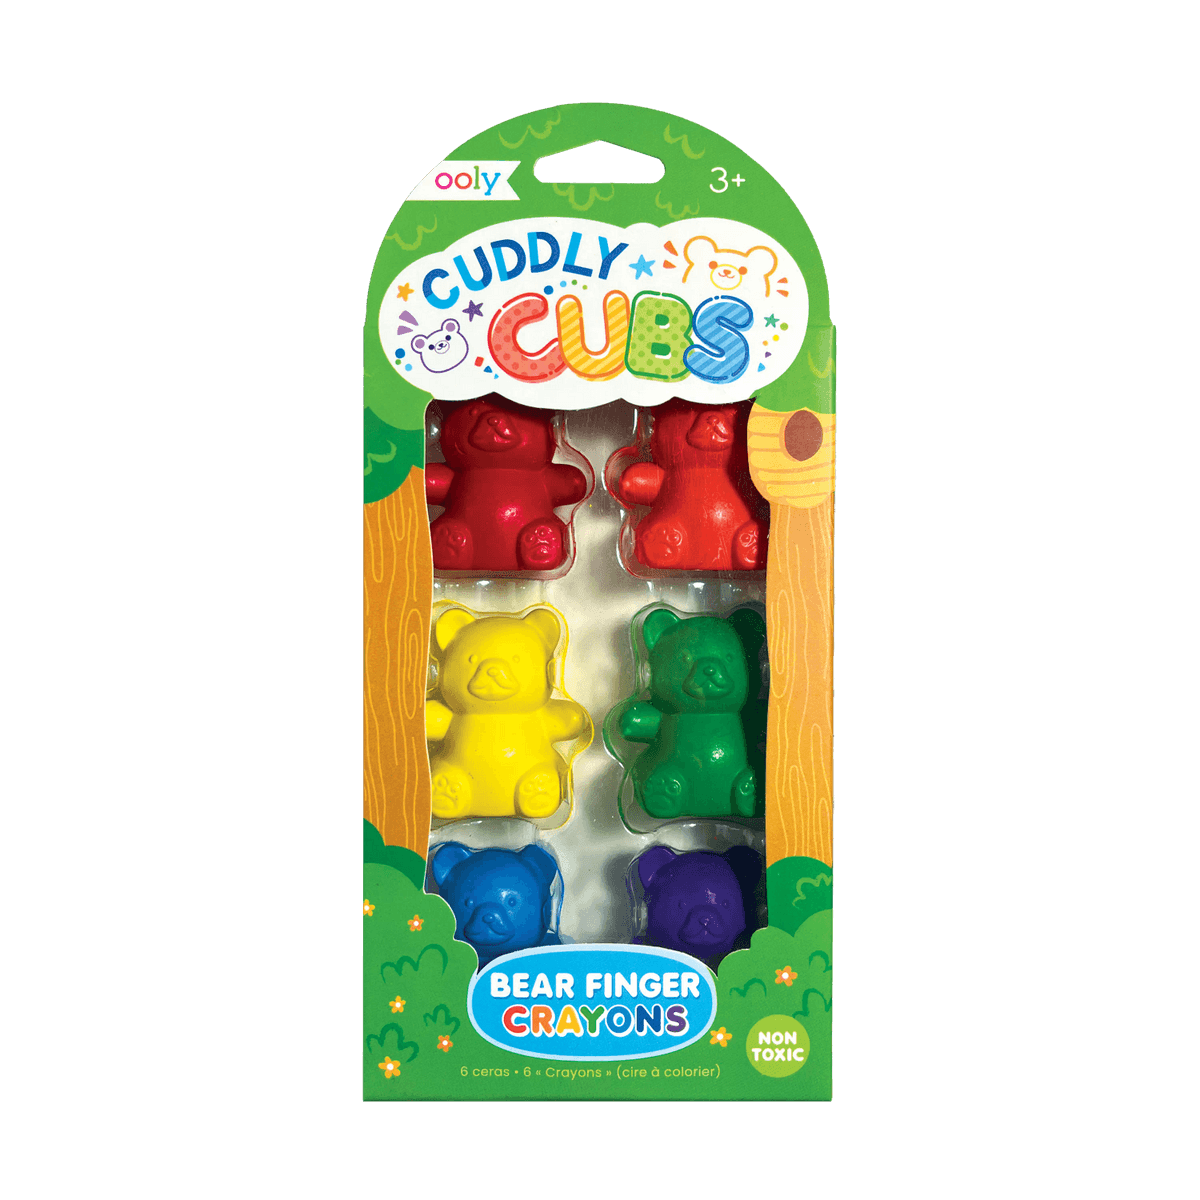 Cuddly Cubs bear finger crayons in packaging